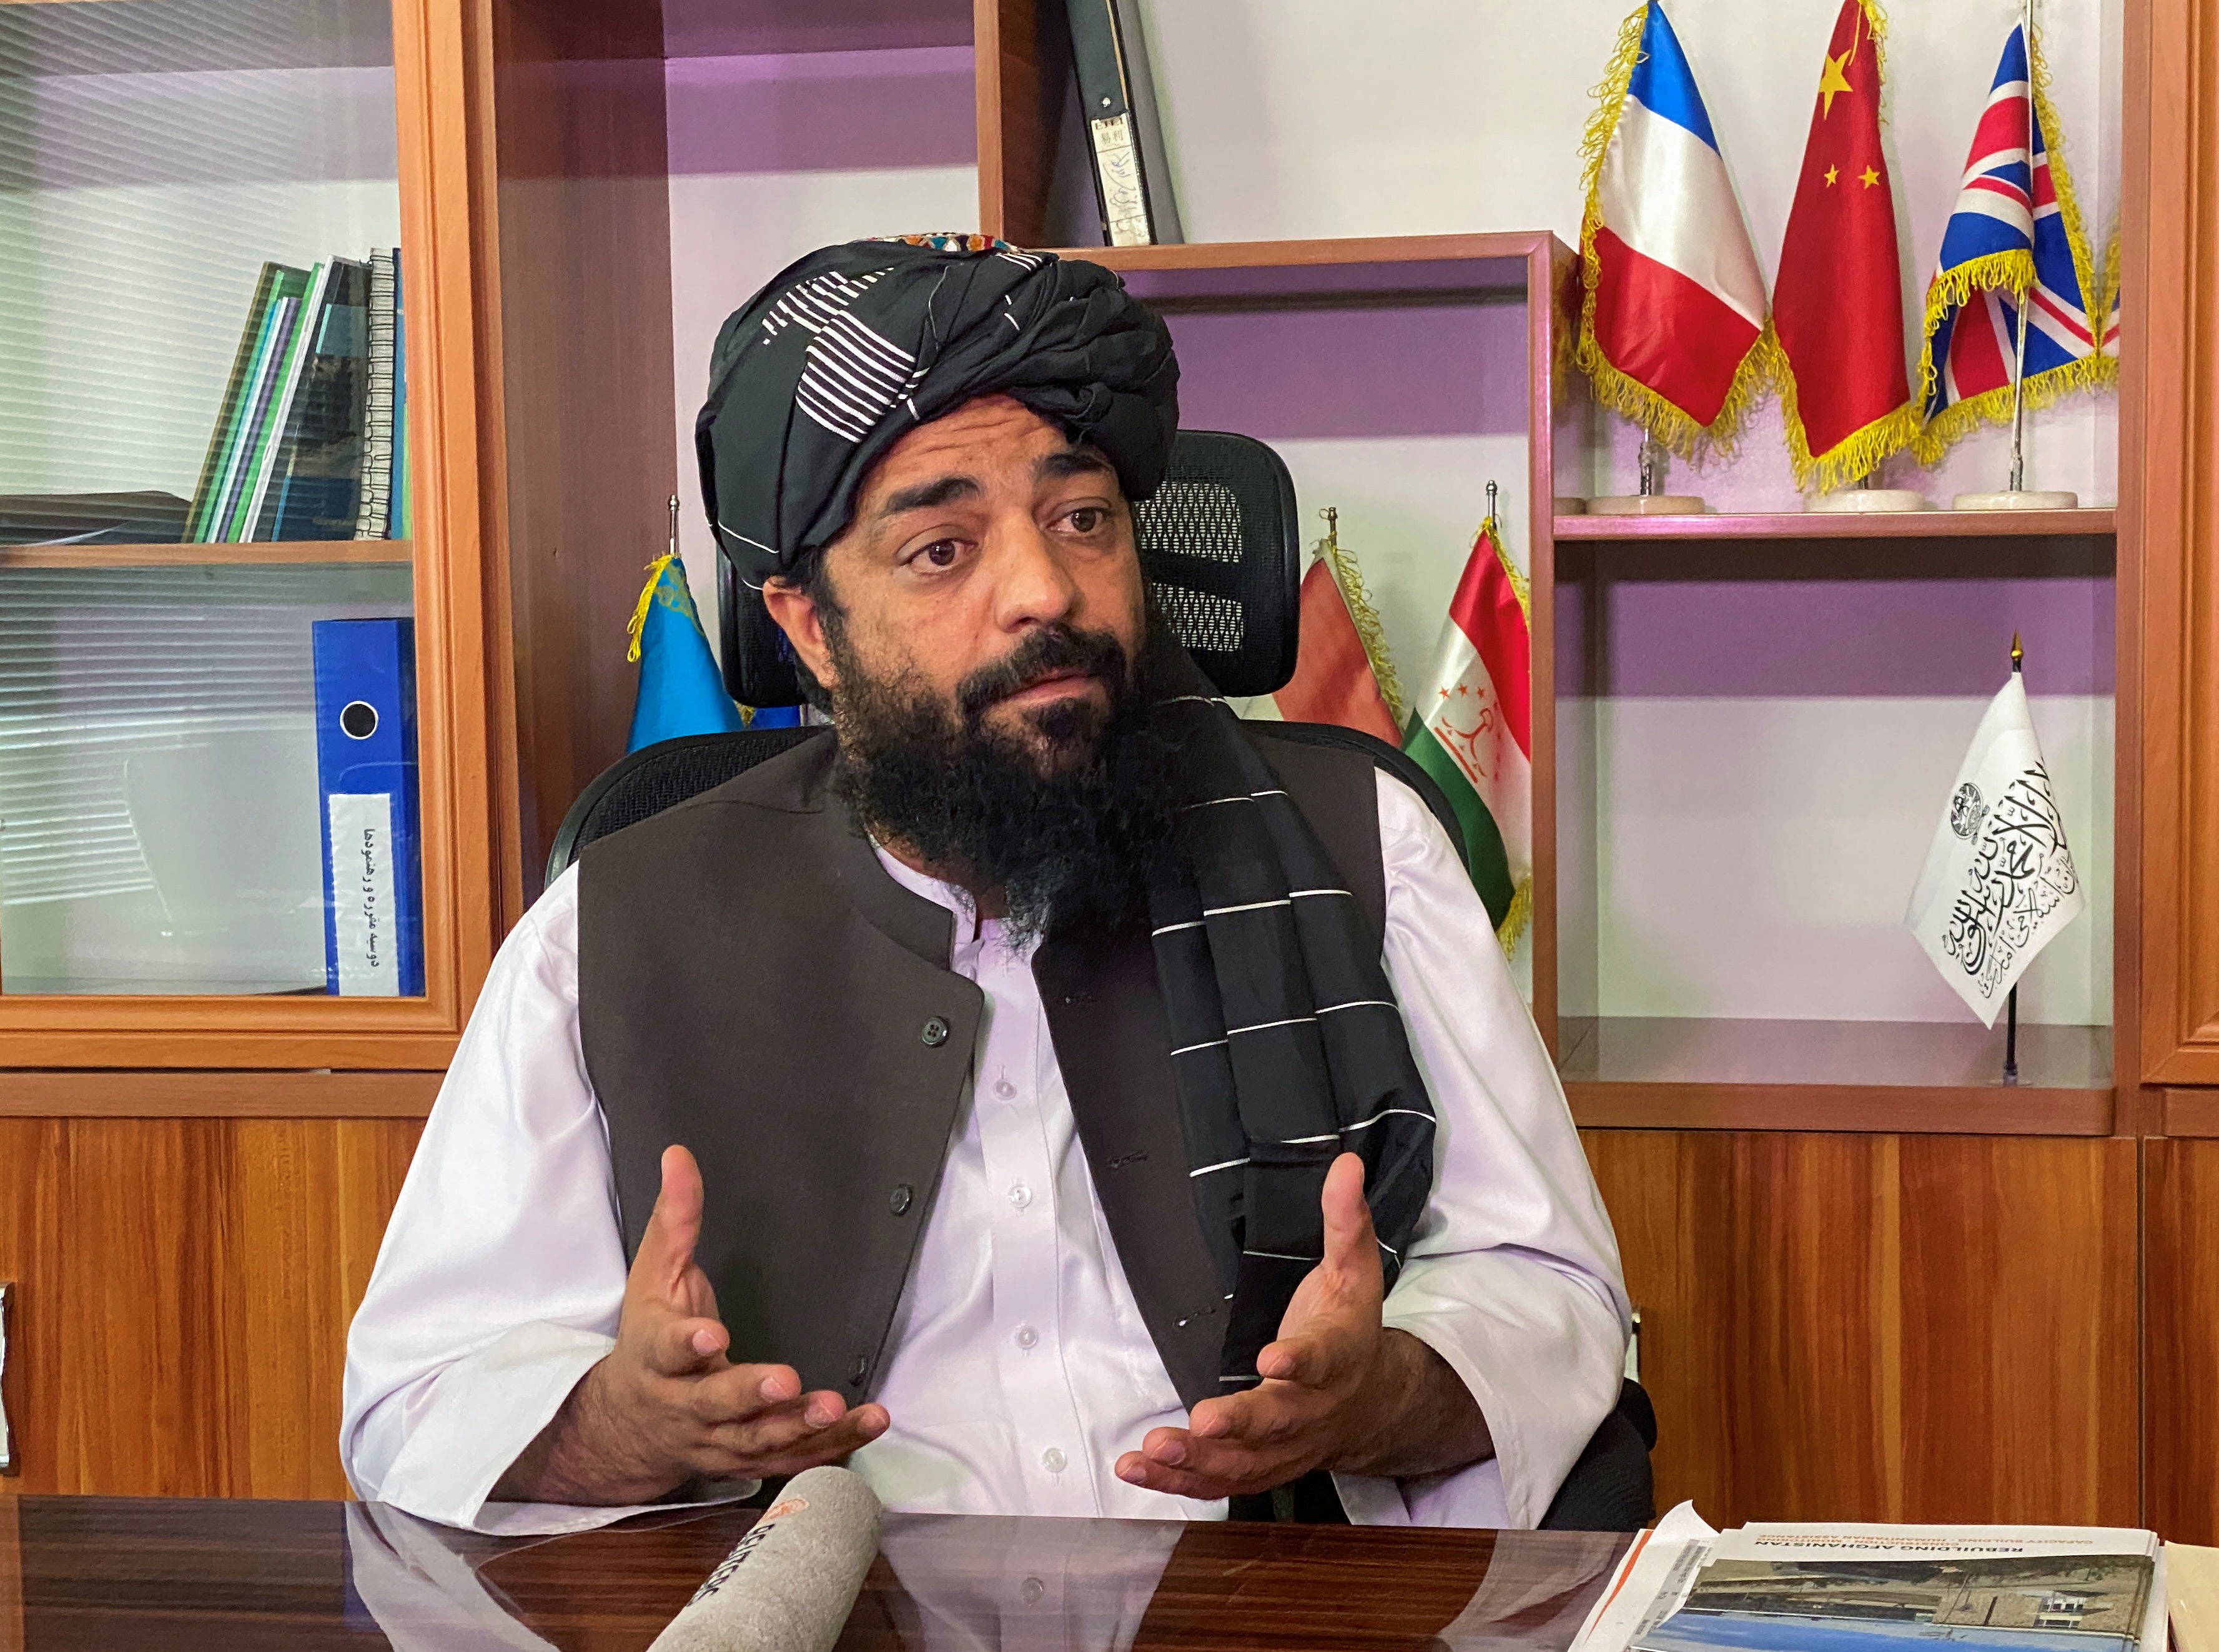 Waheedullah Hashimi, Director of External Programmes and Aid at the Ministry of Education, speaks during an interview in Kabul, Afghanistan October 31, 2021. Picture taken on October 31, 2021. REUTERS/Yosri Al Jamal